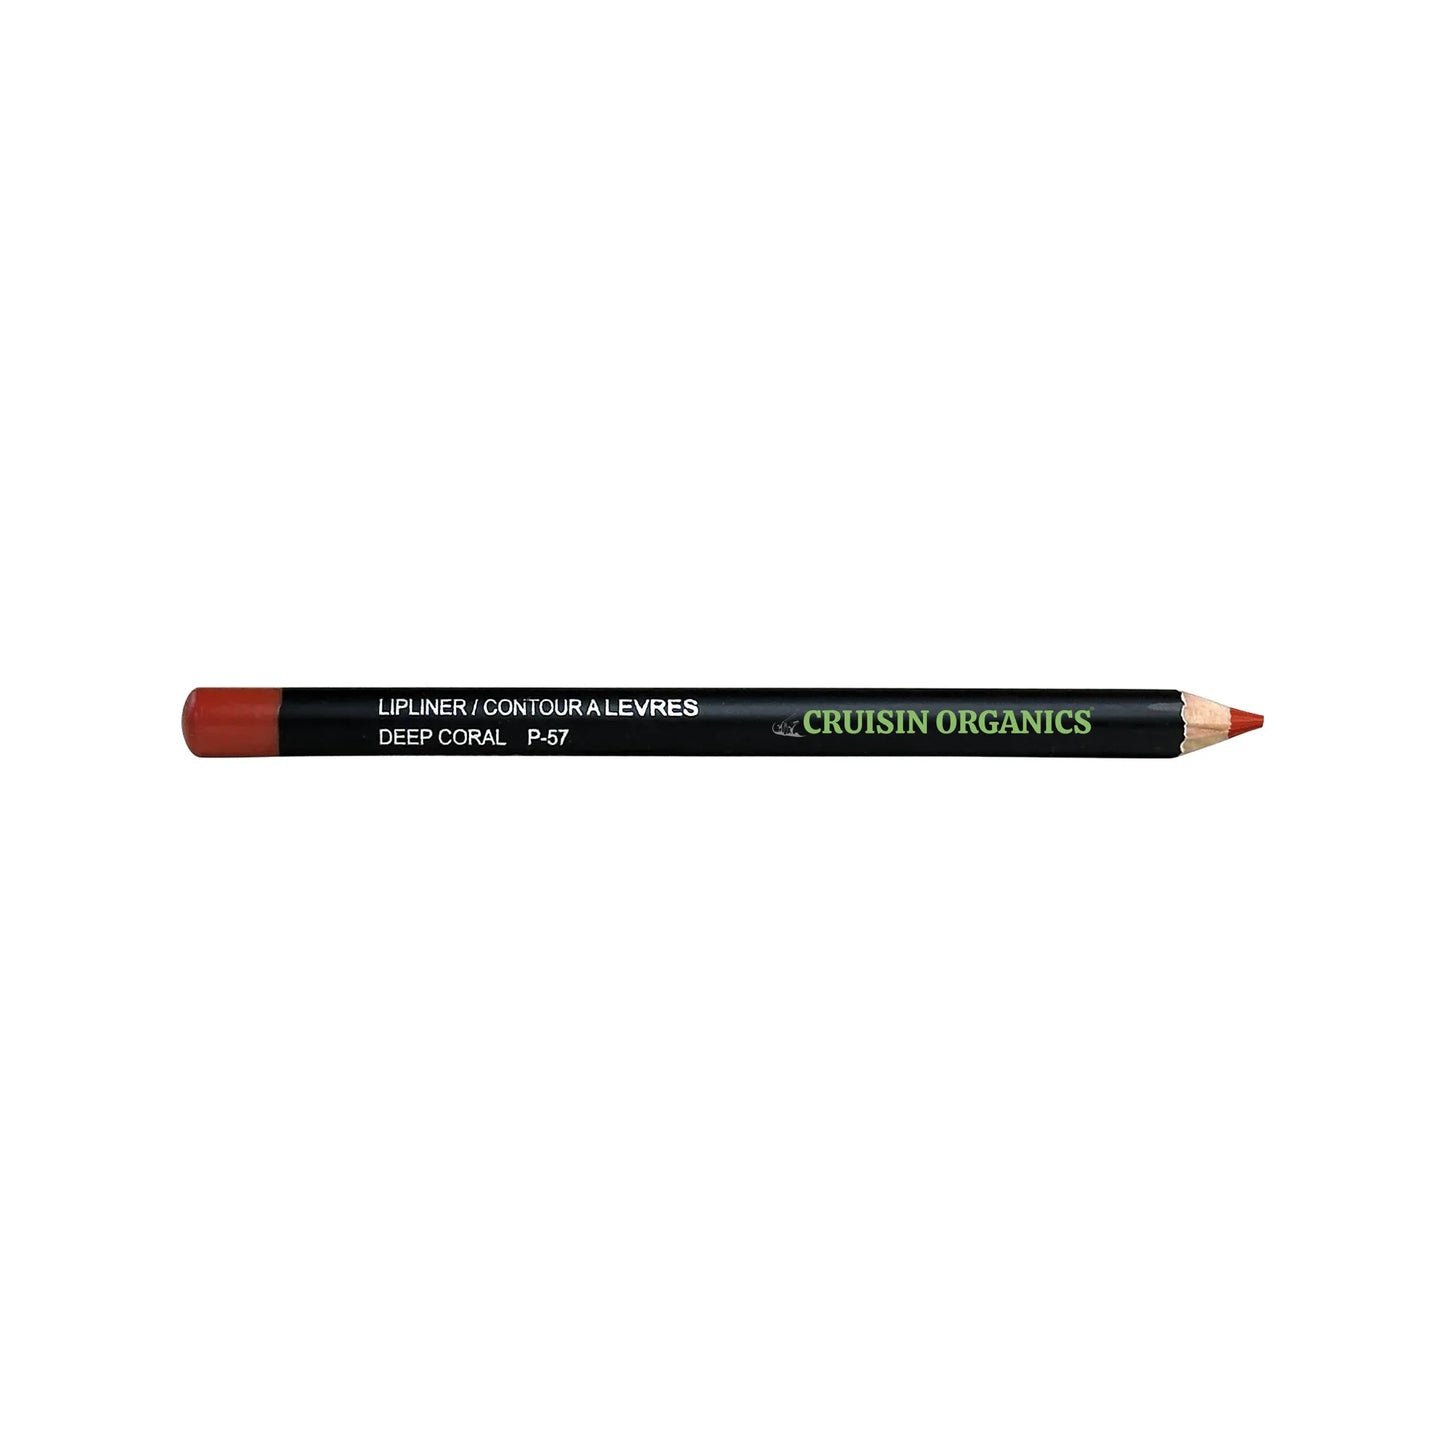 Cruisin Organics Deep Coral Lip Liner. Stay in line for true tone to line your lip with deep coral infused with beeswax and seed oils, this smudge-proof and long-lasting formula to achieve plush and enduring lip escense.